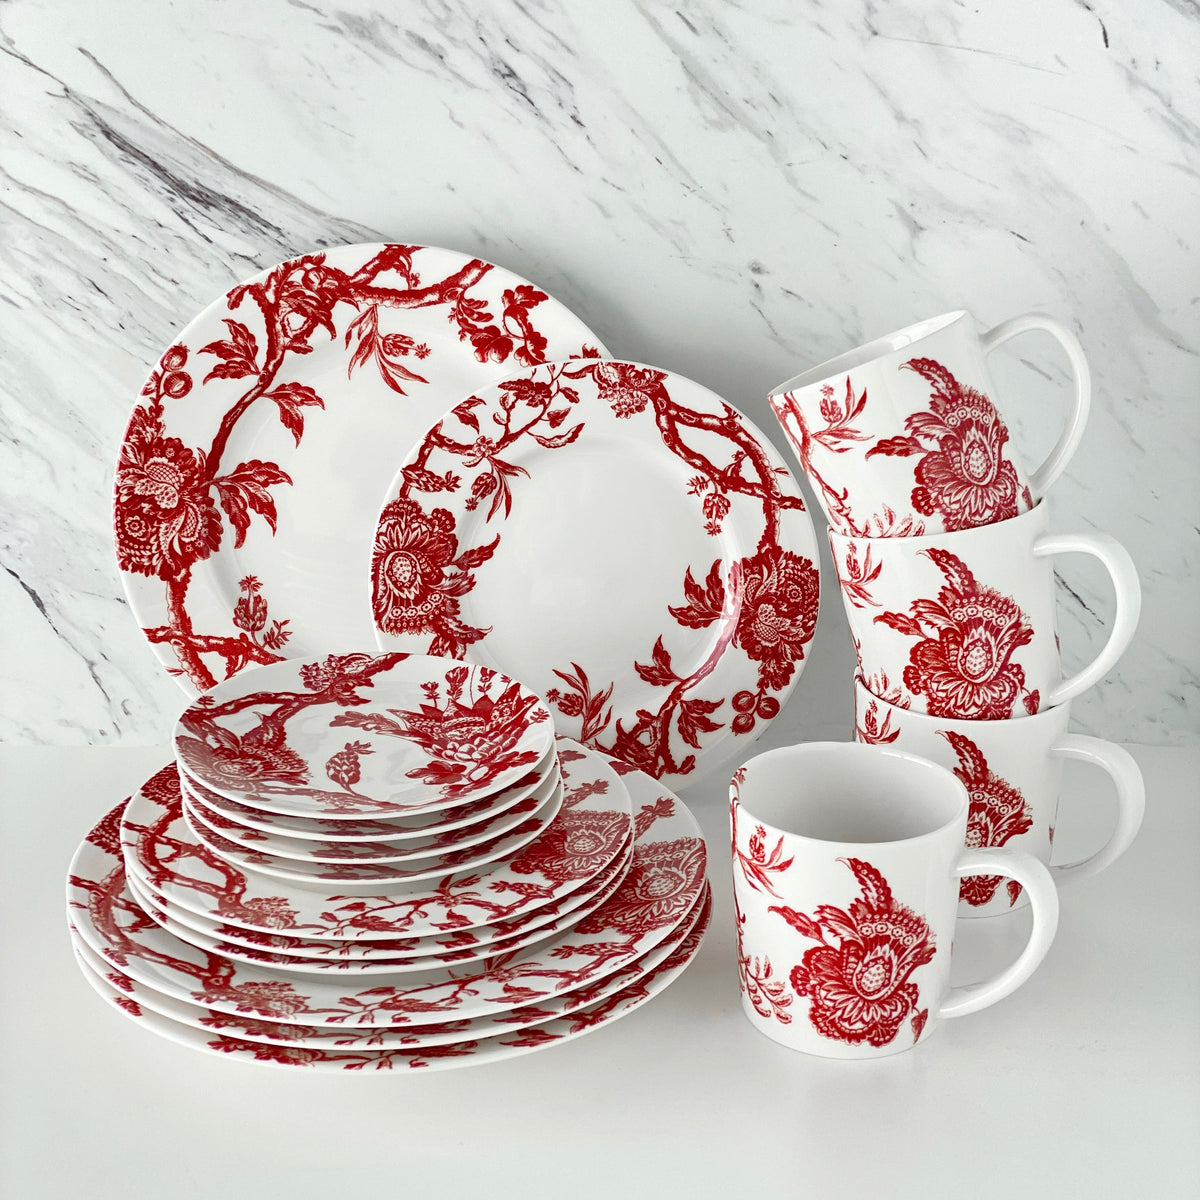 The Arcadia Crimson 16 Piece Dinnerware Set from Caskata includes all you need for a table for 4, including dinner, salad, and canape plates and mugs.